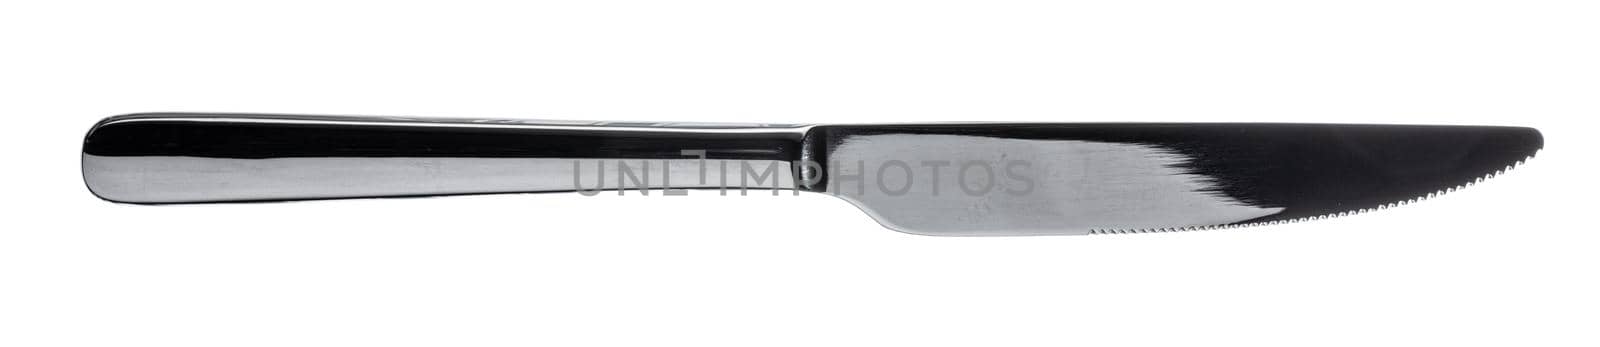 Silver knife isolated on white background close up photo